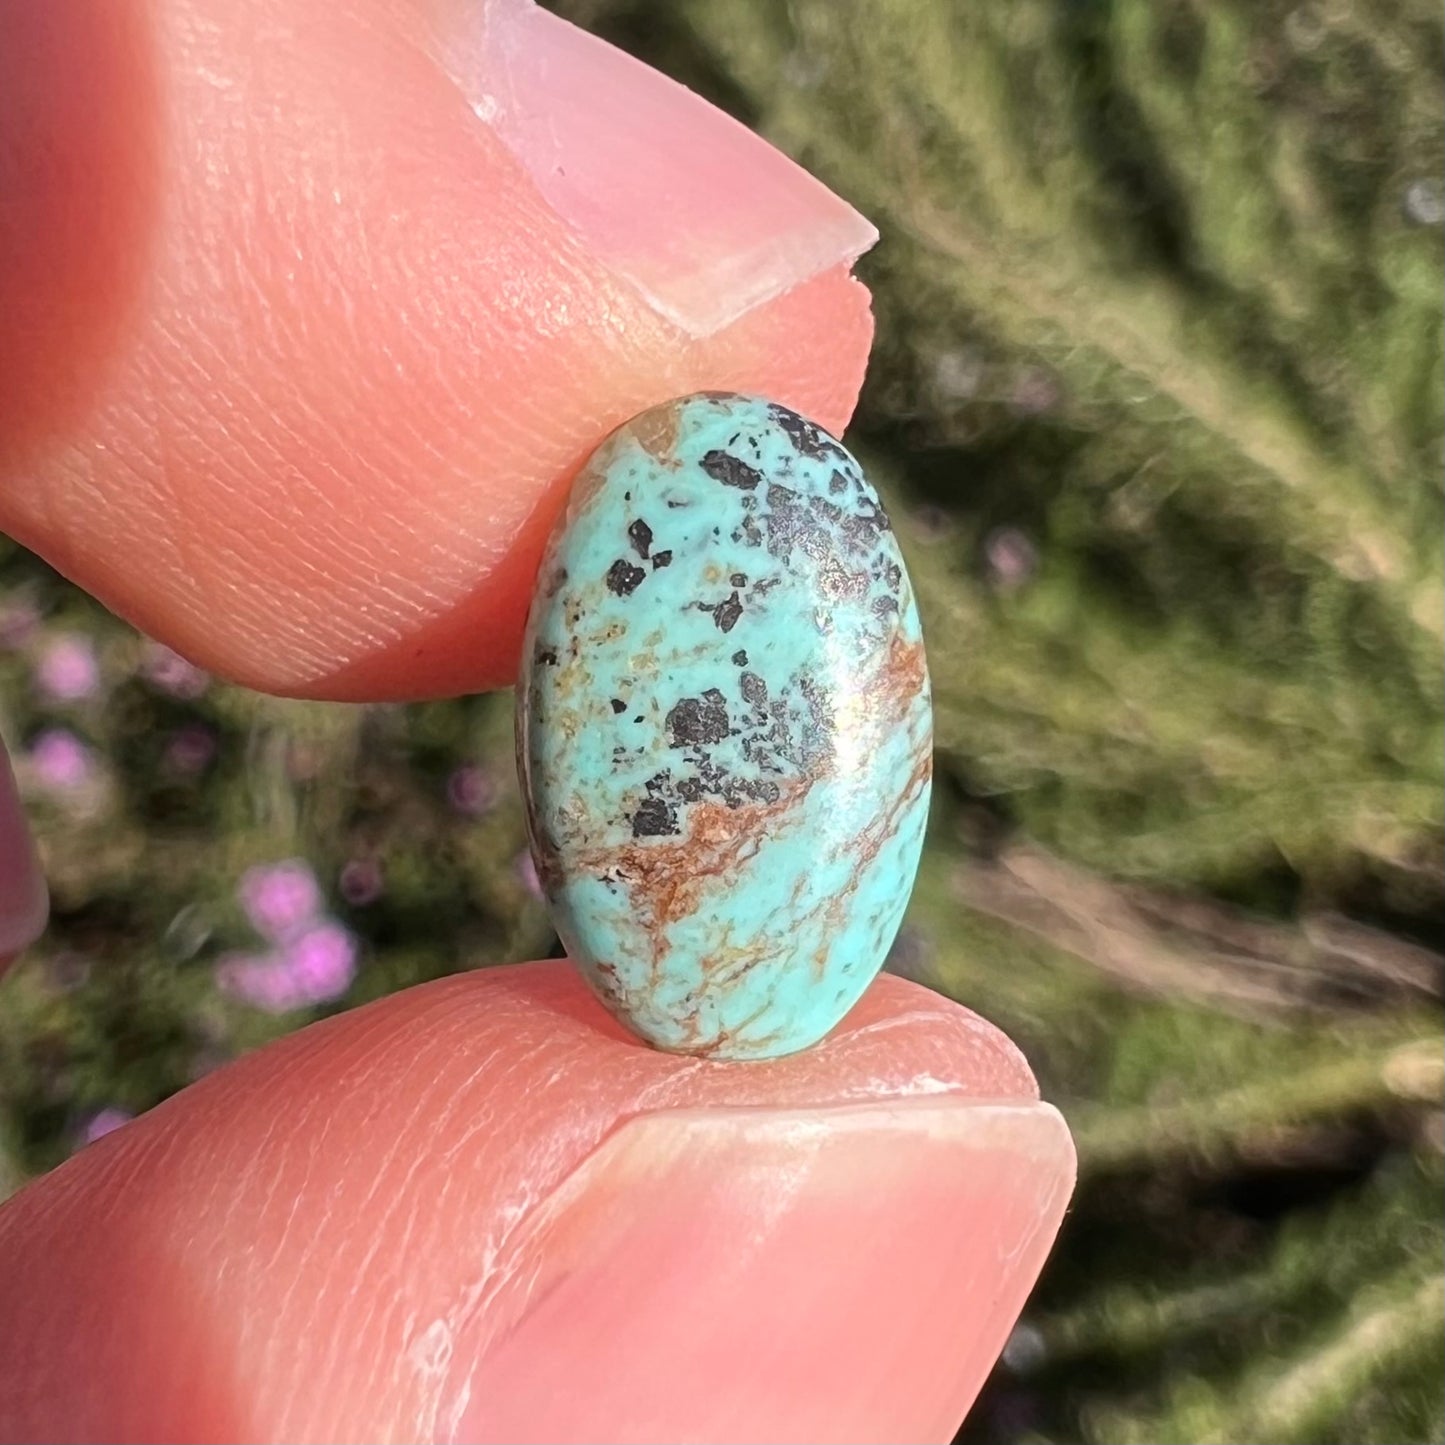 A loose, oval cabochon cut turquoise stone.  The stone is light blue with black spotted and brown streaked matrix.